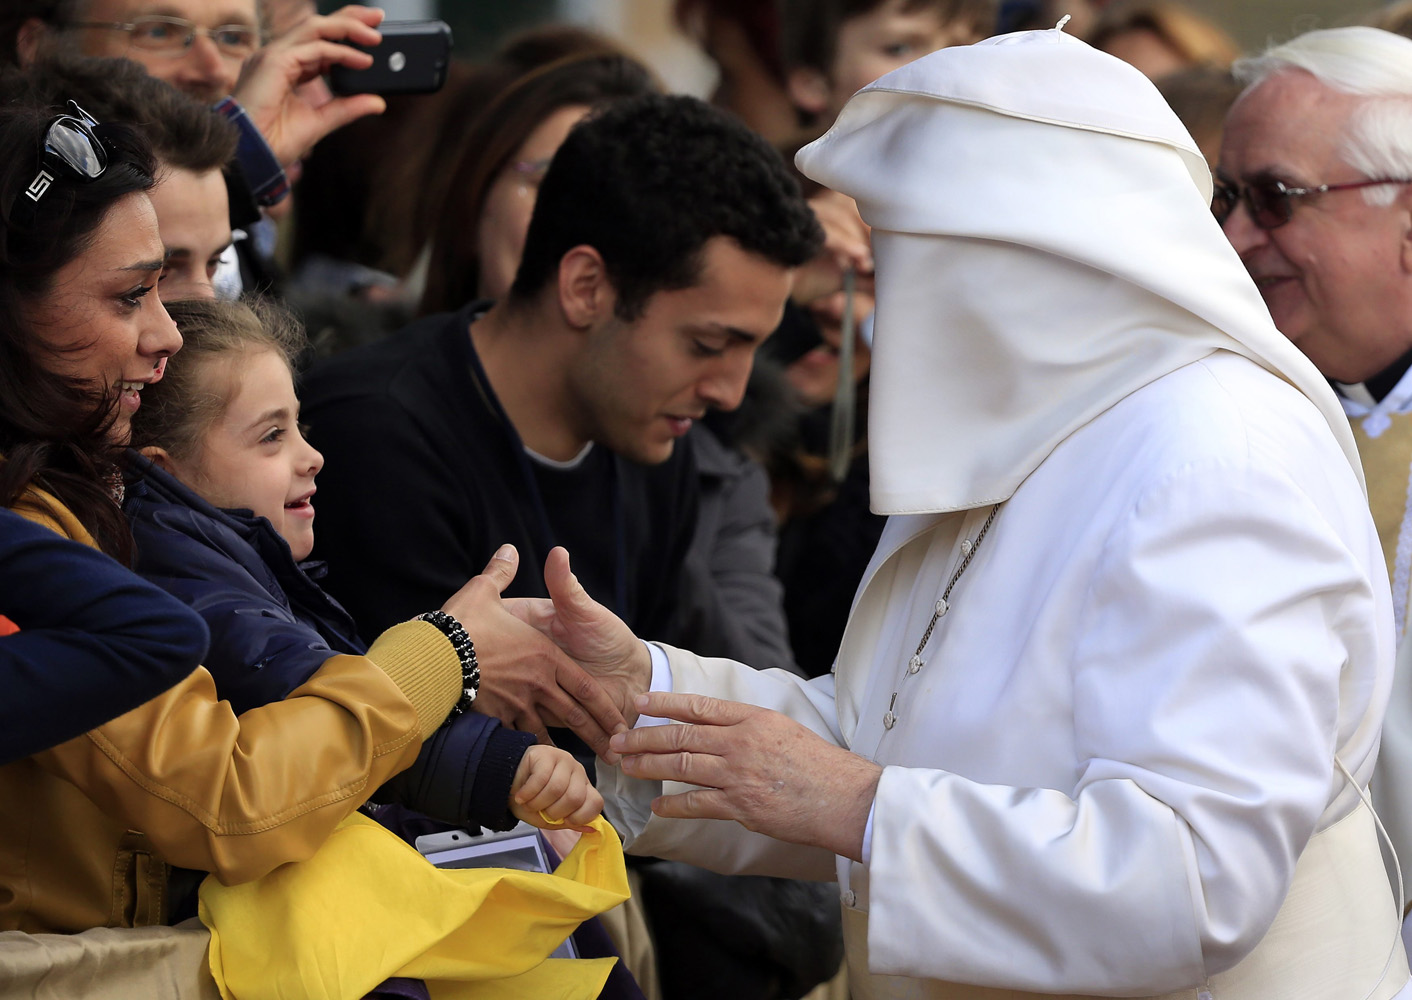 A gust of wind blows Pope Francis's mantle as he greets the faithful at the S. Maria della Provvidenza church in Rome